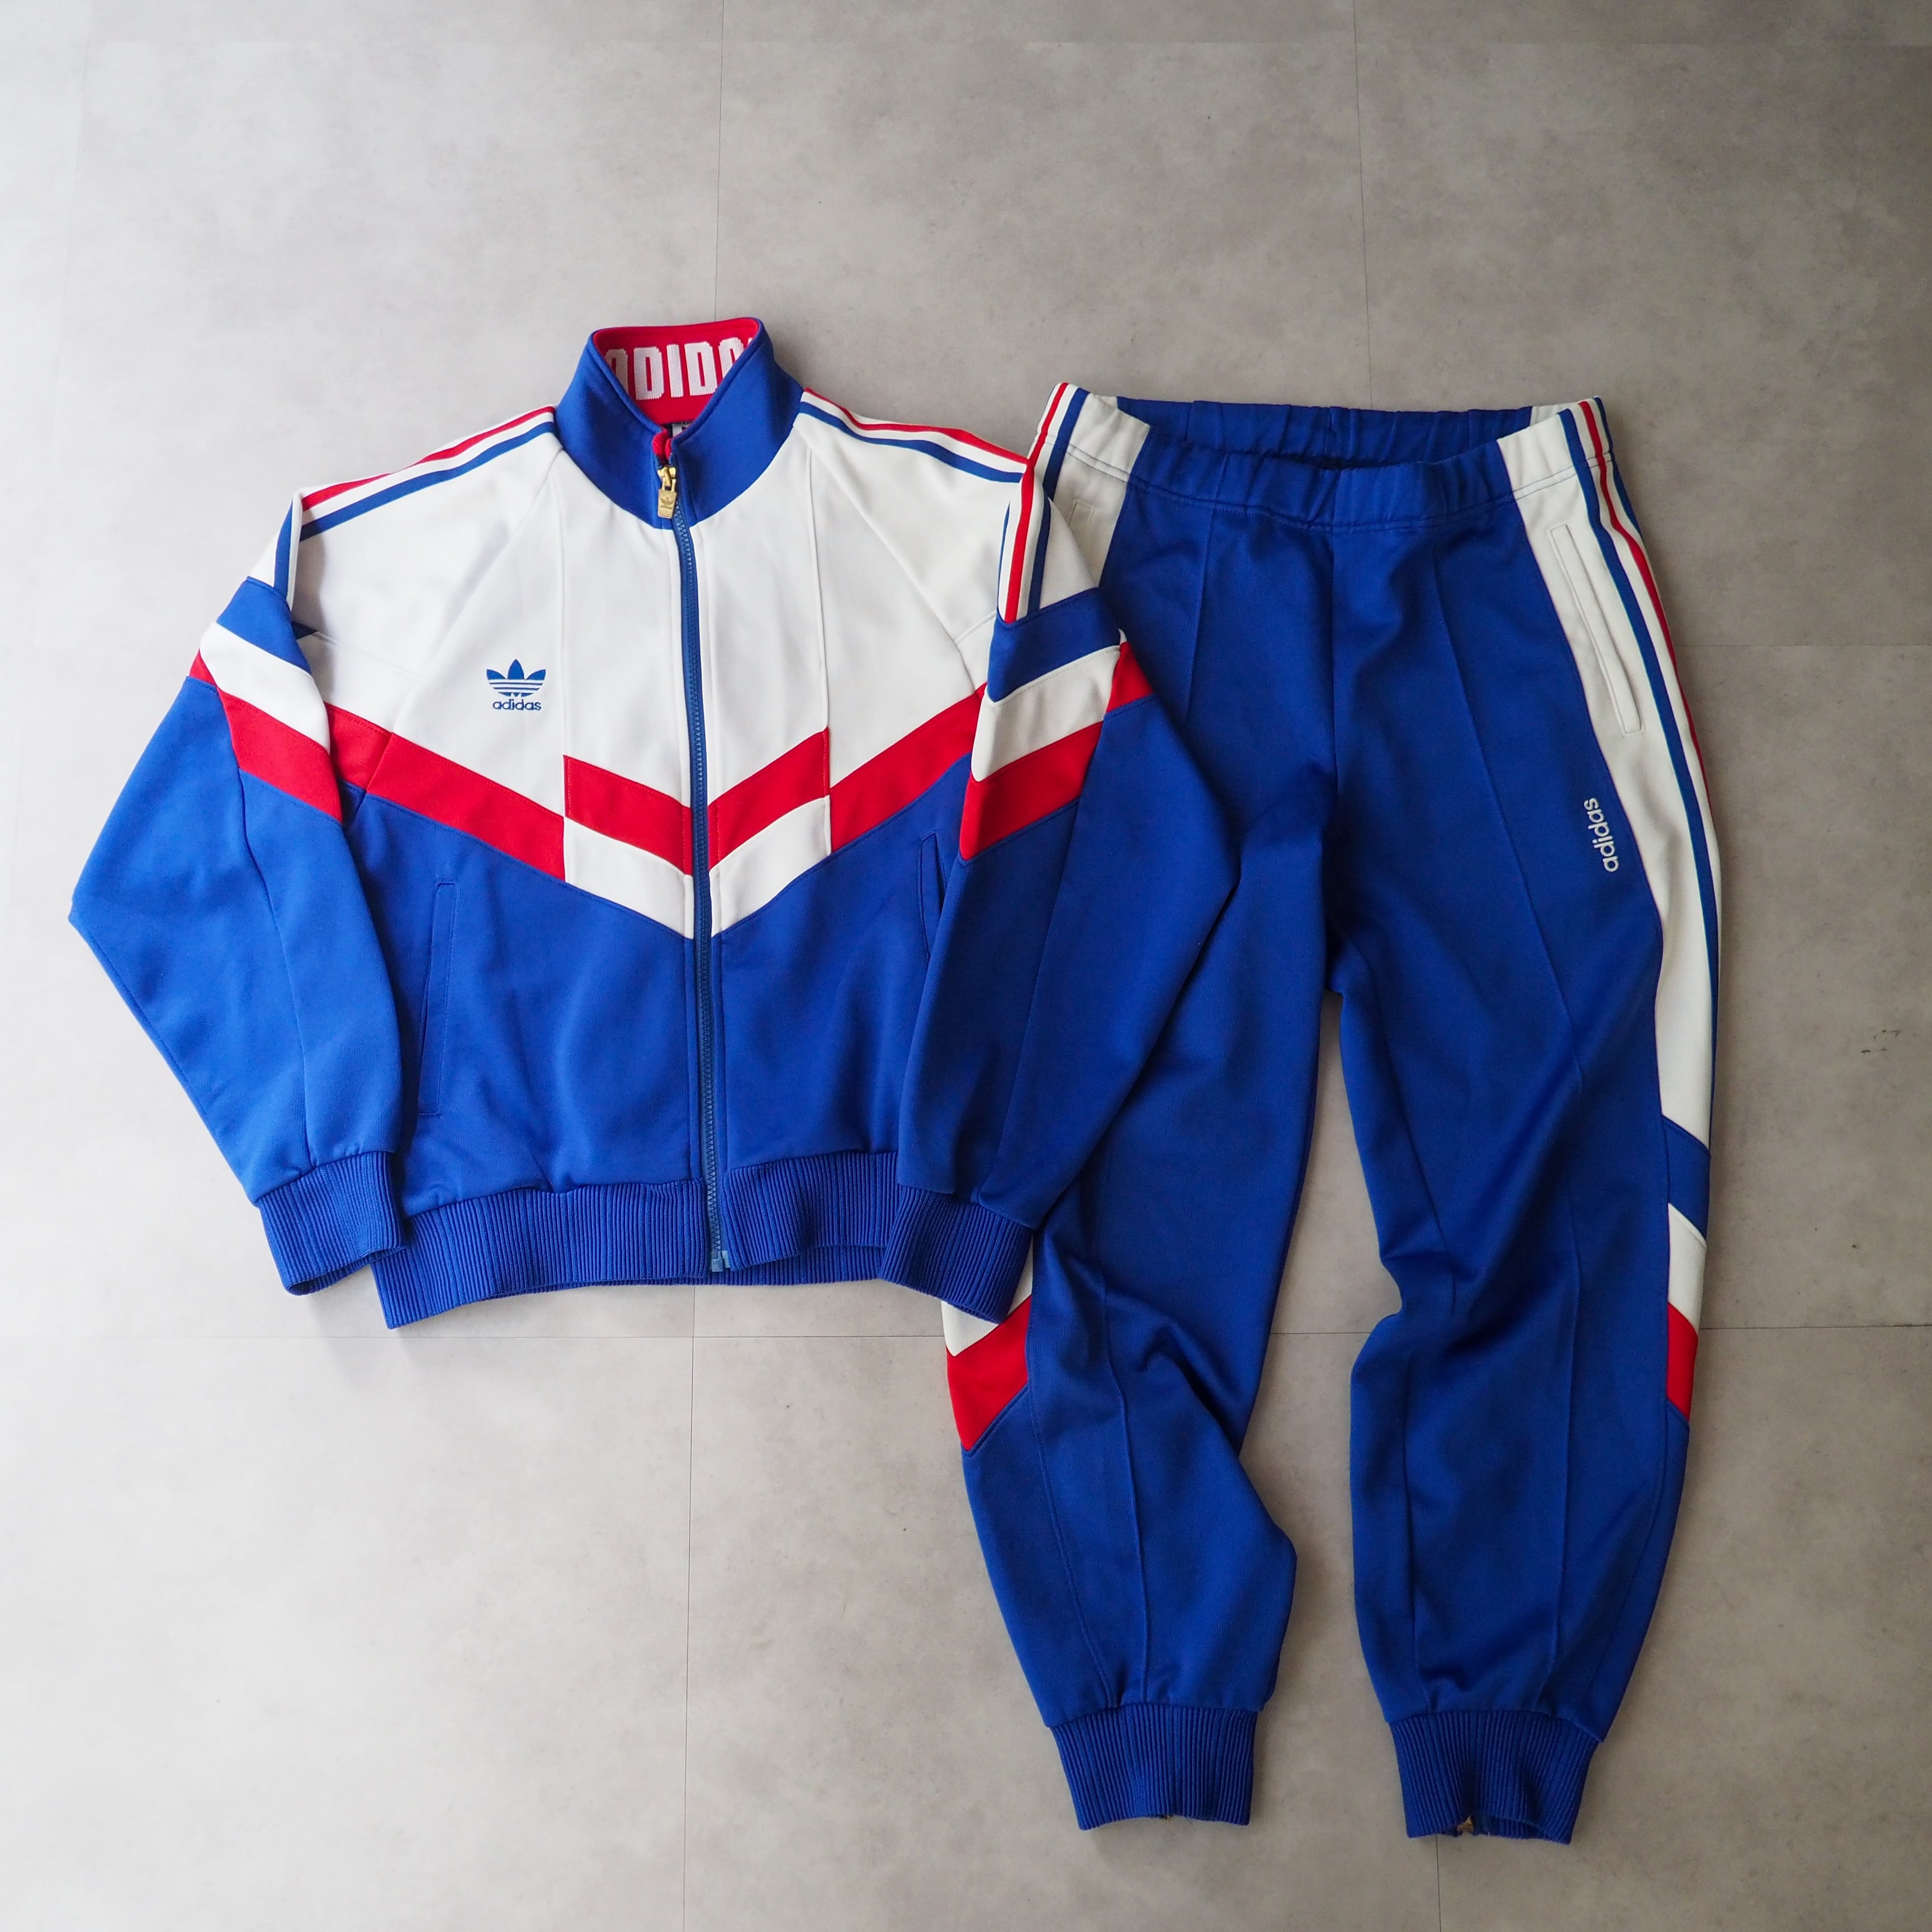 80s-90s “ADIDAS” by DESCENTE track jacket & pants set up 80年代